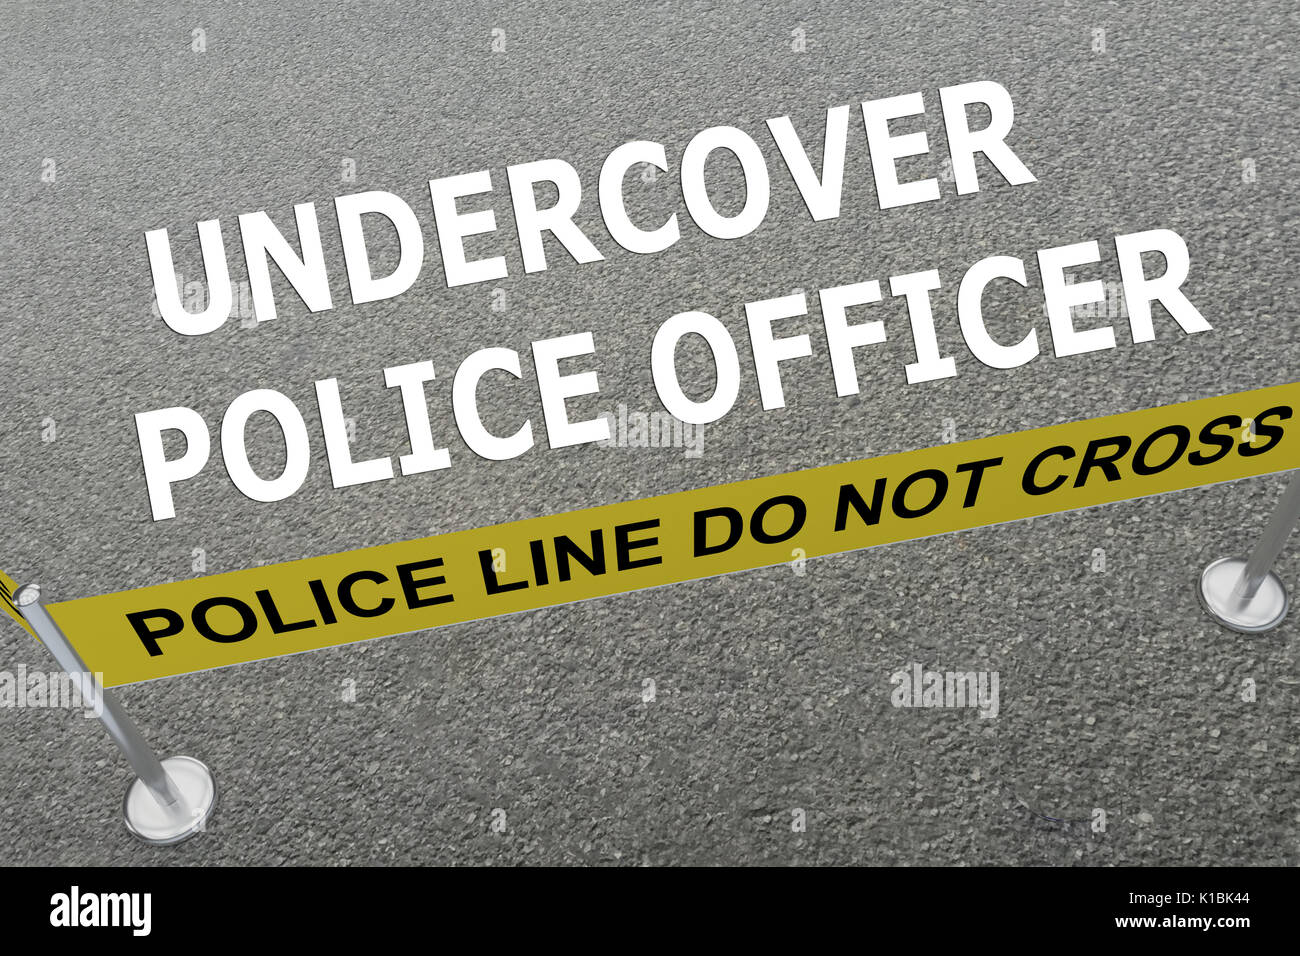 3D illustration of UNDERCOVER POLICE OFFICER title on the ground in a police arena. Police concept Stock Photo